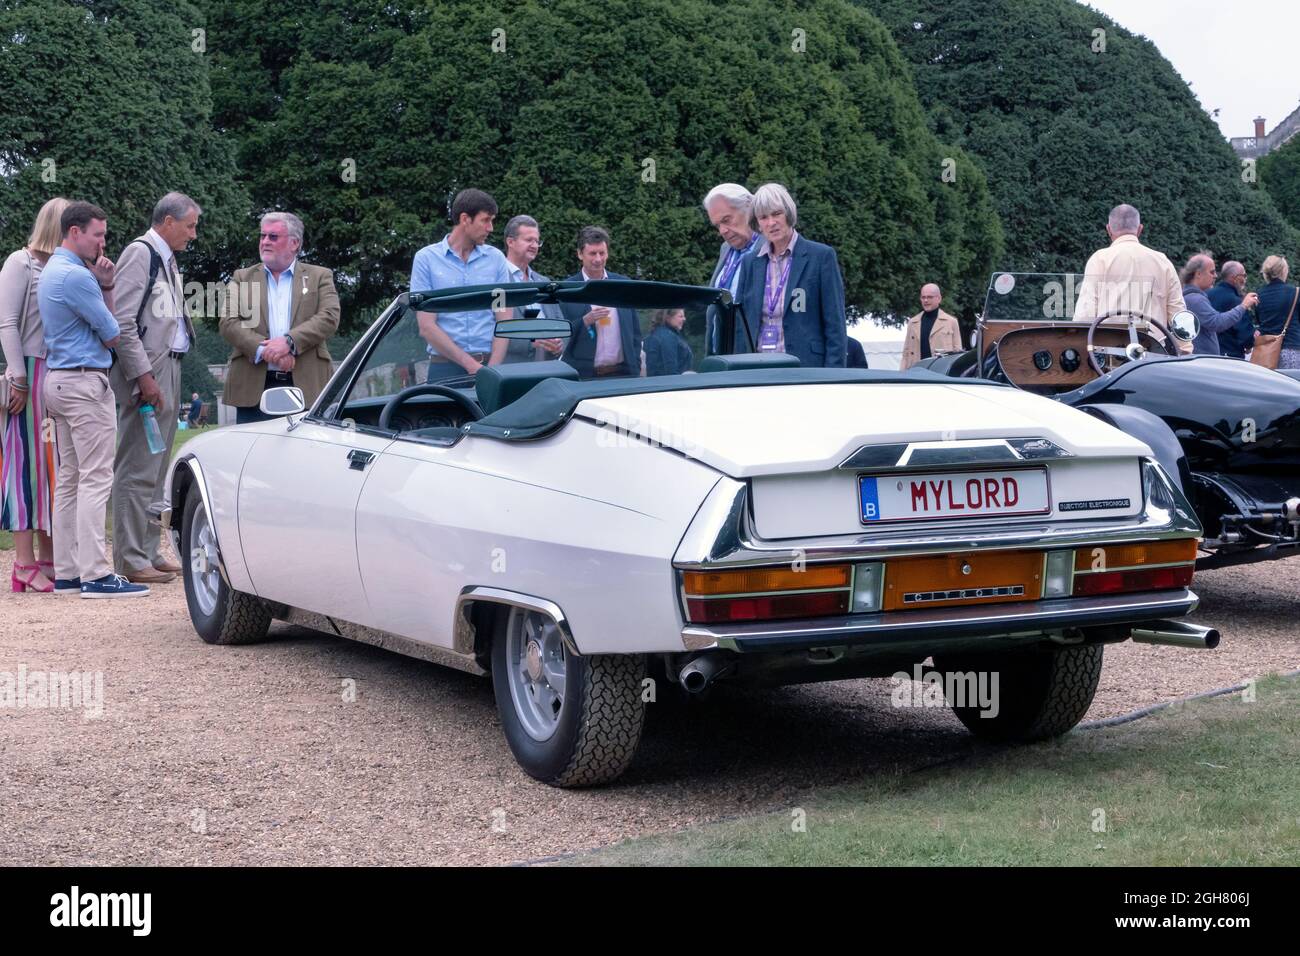 1971 Citroen SM My Lord at the Hampton Court Concours D' Elegance 2021 Stock Photo